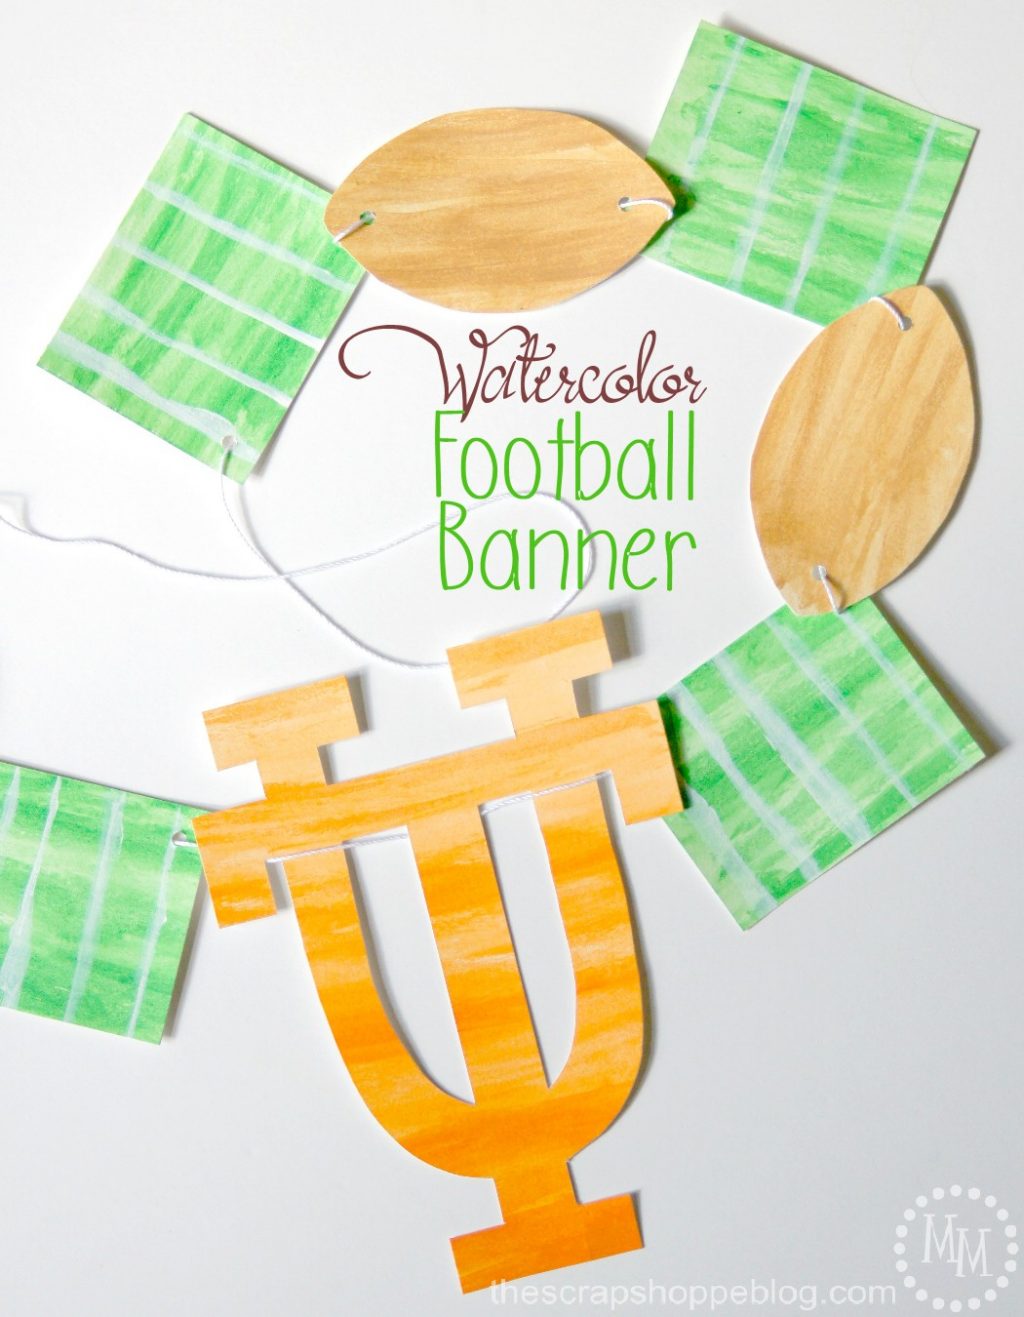 Watercolor Football Banner in your team's color or logo for game day!